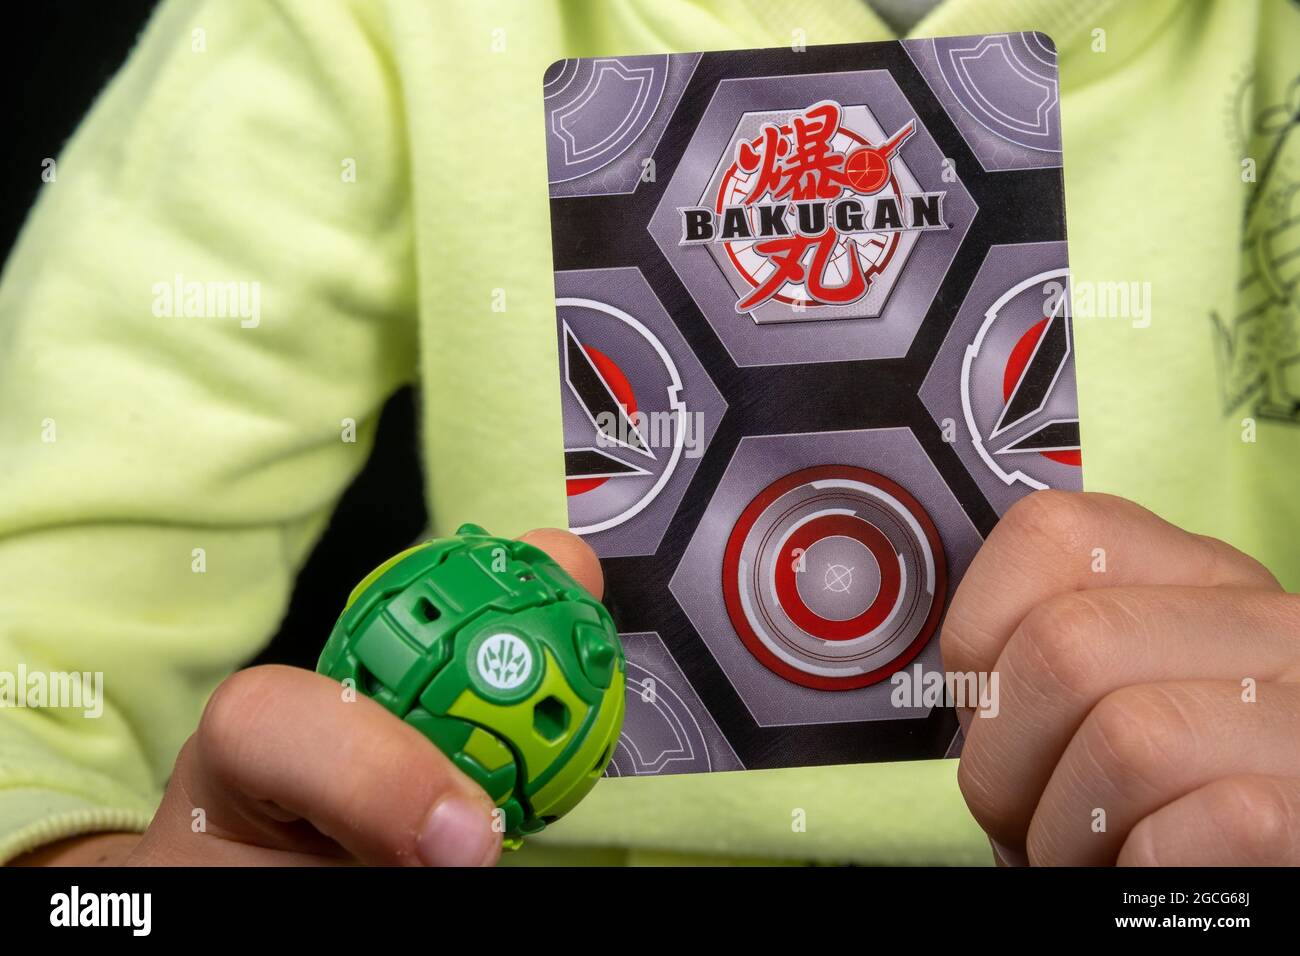 Bakugan Ball toy. New popular transformer toy assembled in ball shape, hold in child's hand with magnetic card. Stafford, United Kingdom, August 8, 20 Stock Photo